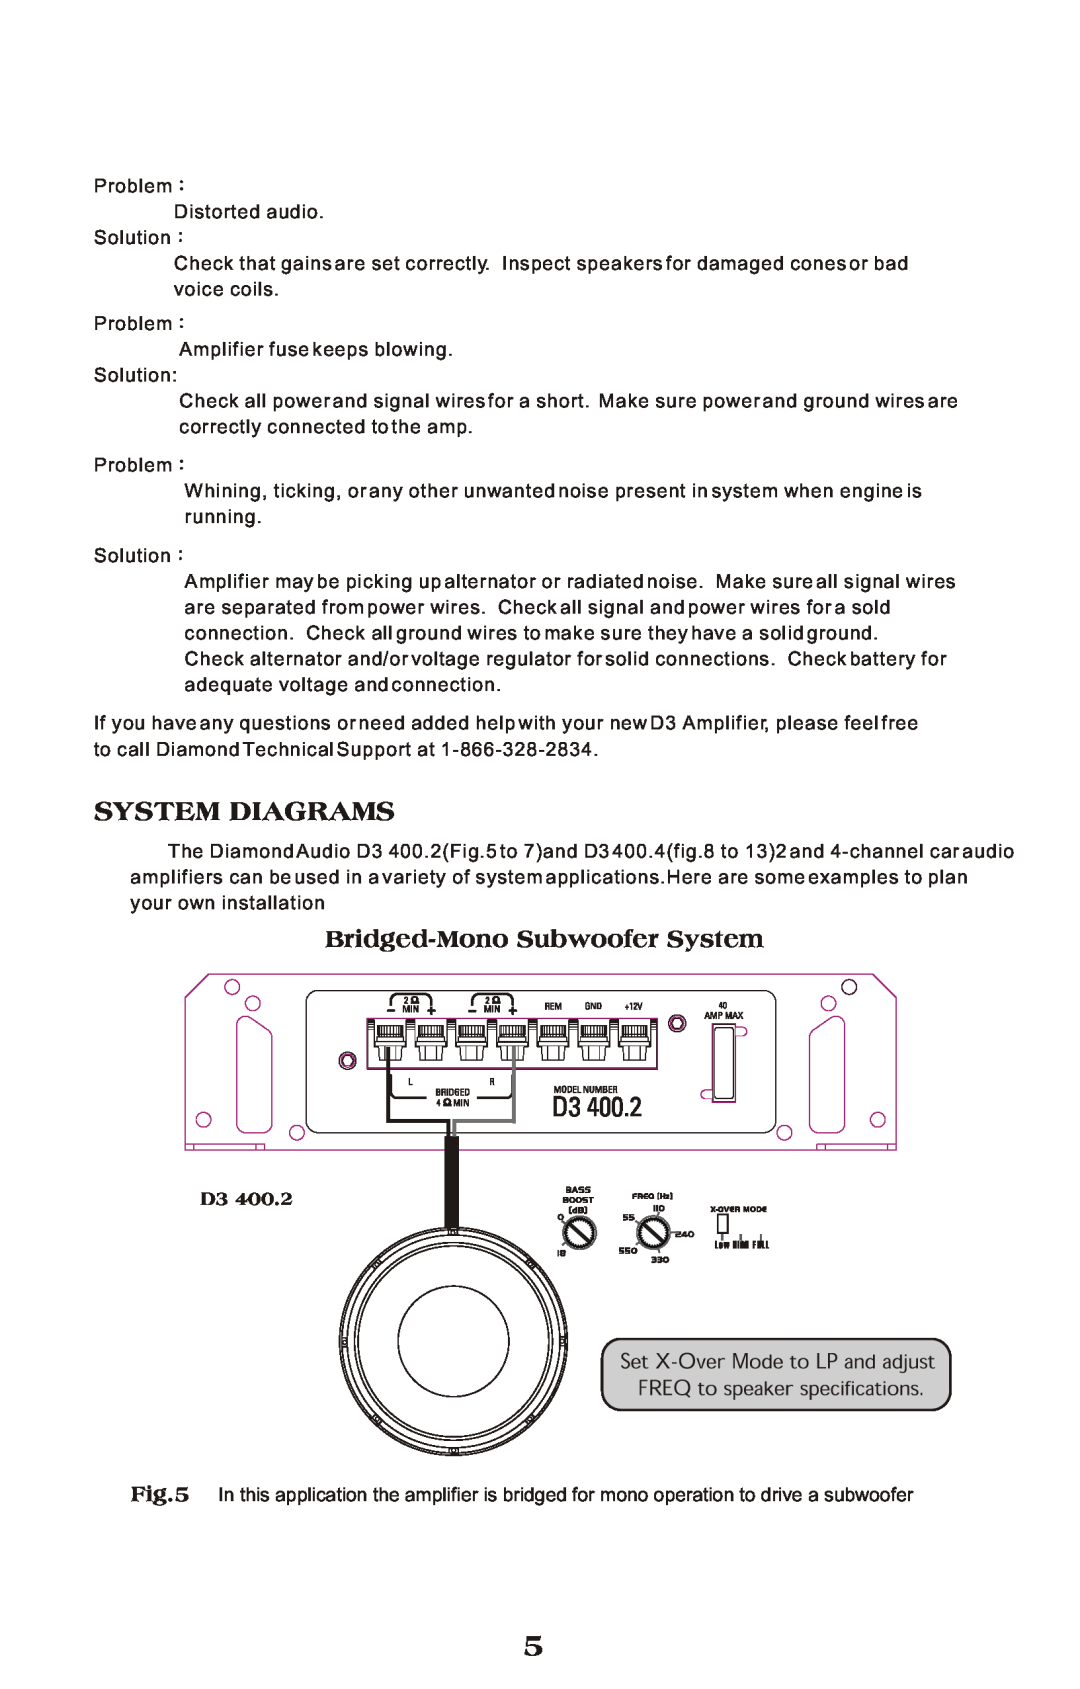 Diamond Audio Technology D3 Series specifications System Diagrams, Bridged-MonoSubwoofer System 